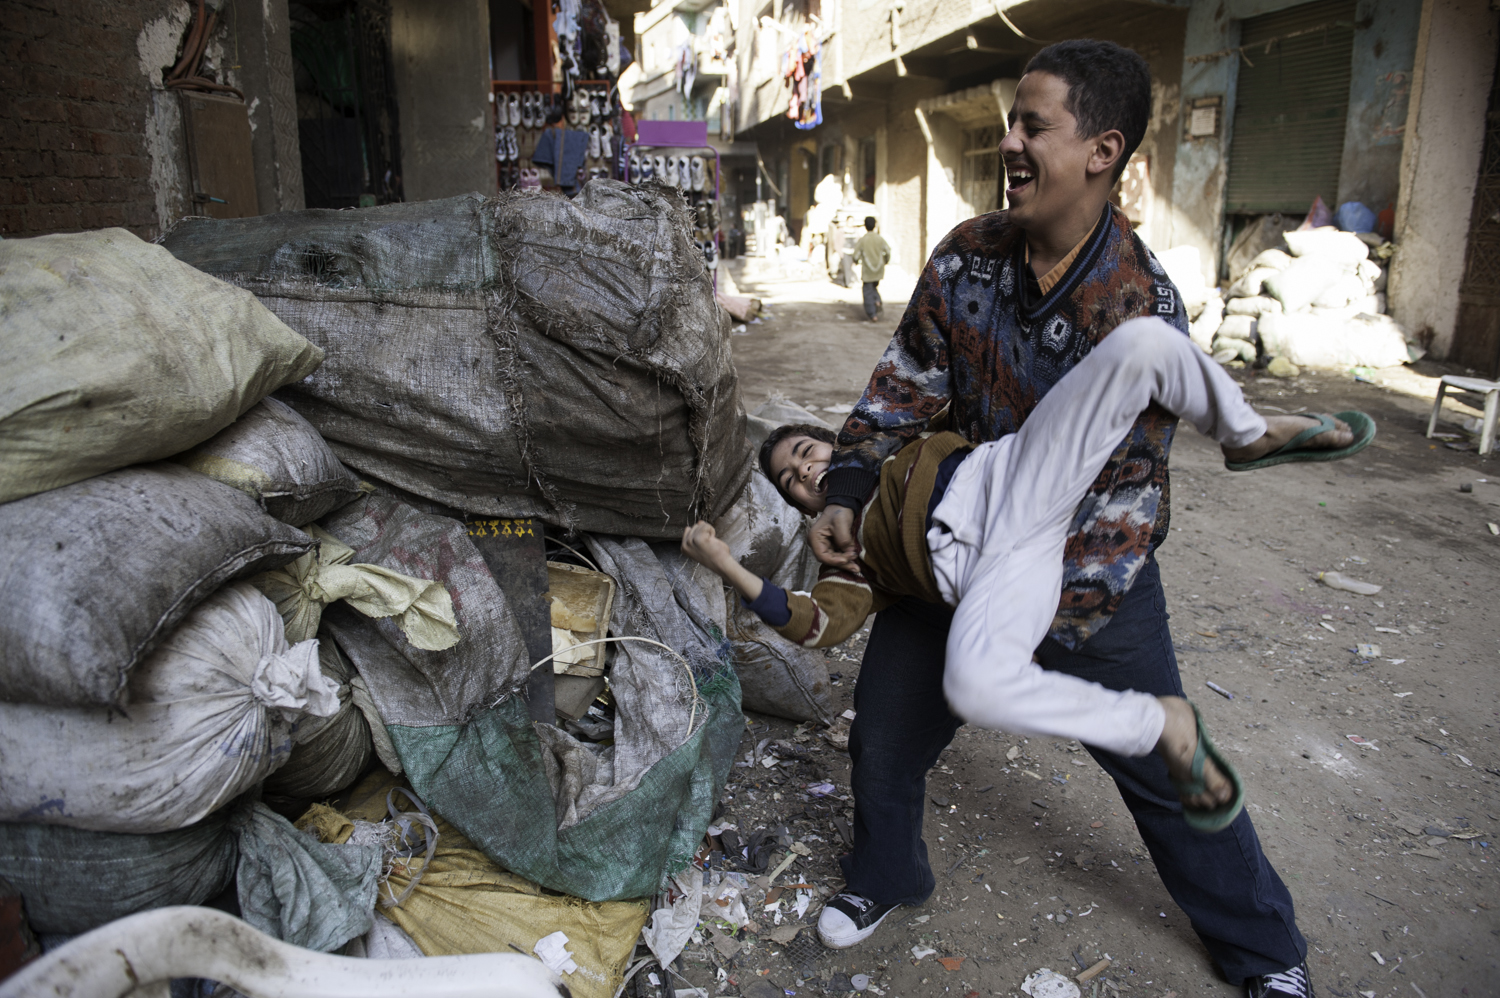  Young boys play in the streets of a Christian area of Cairo, Egypt. 